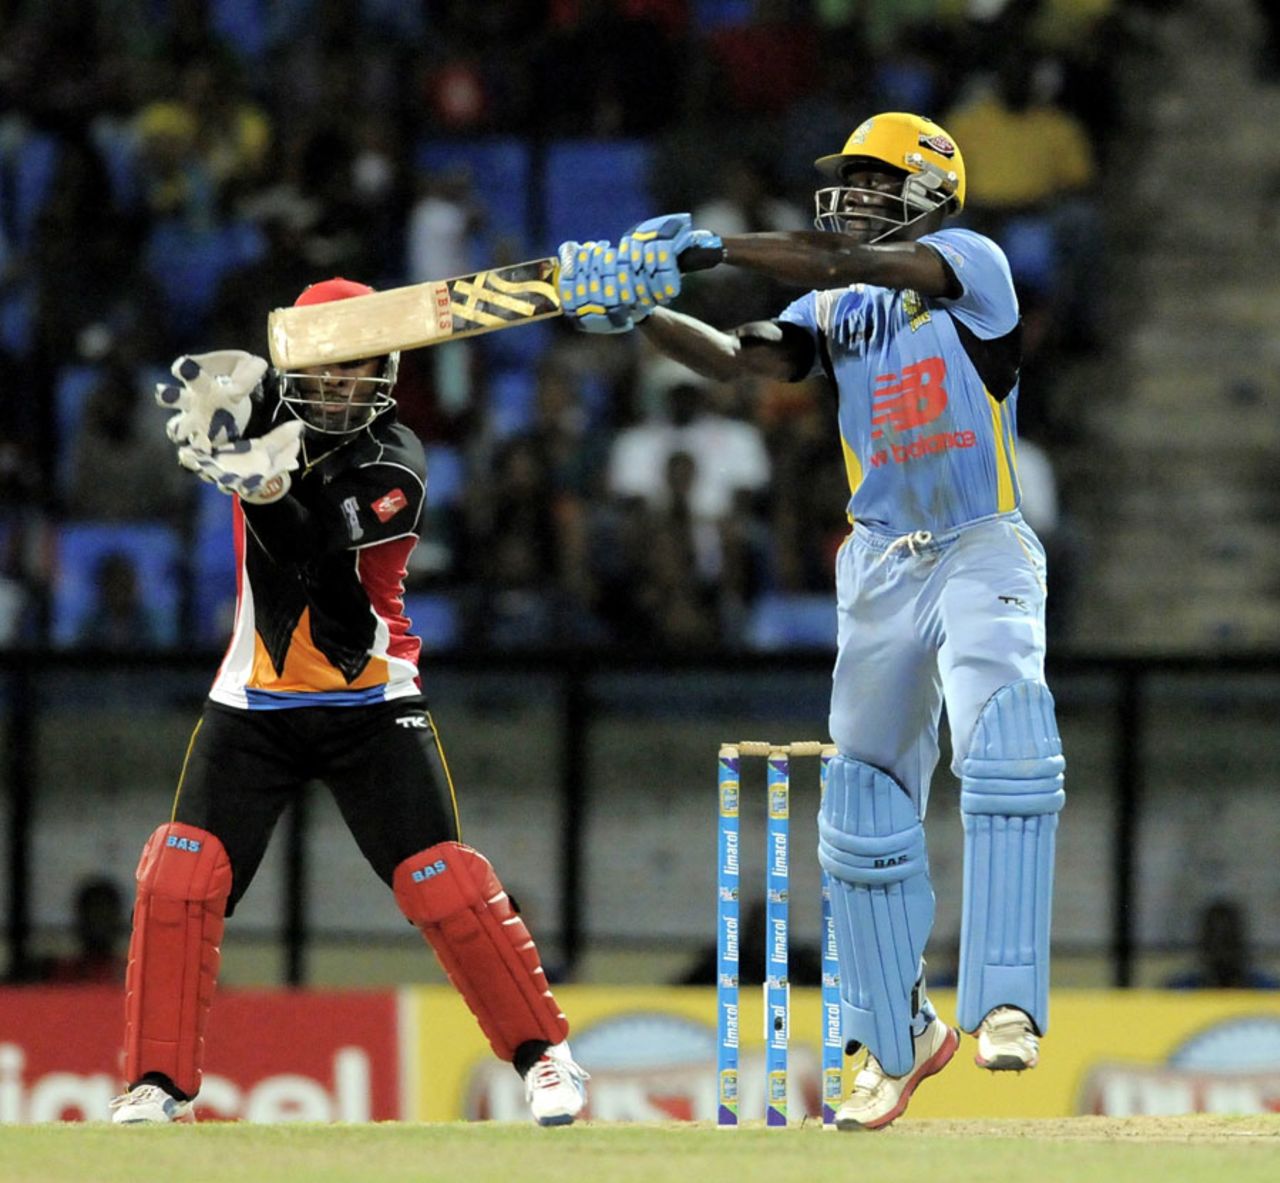 Andre Fletcher guided St Lucia's innings with 76 off 53 balls, Antigua Hawksbills v St Lucia Zouks, Caribbean Premier League 2013, Antigua, August 15, 2013